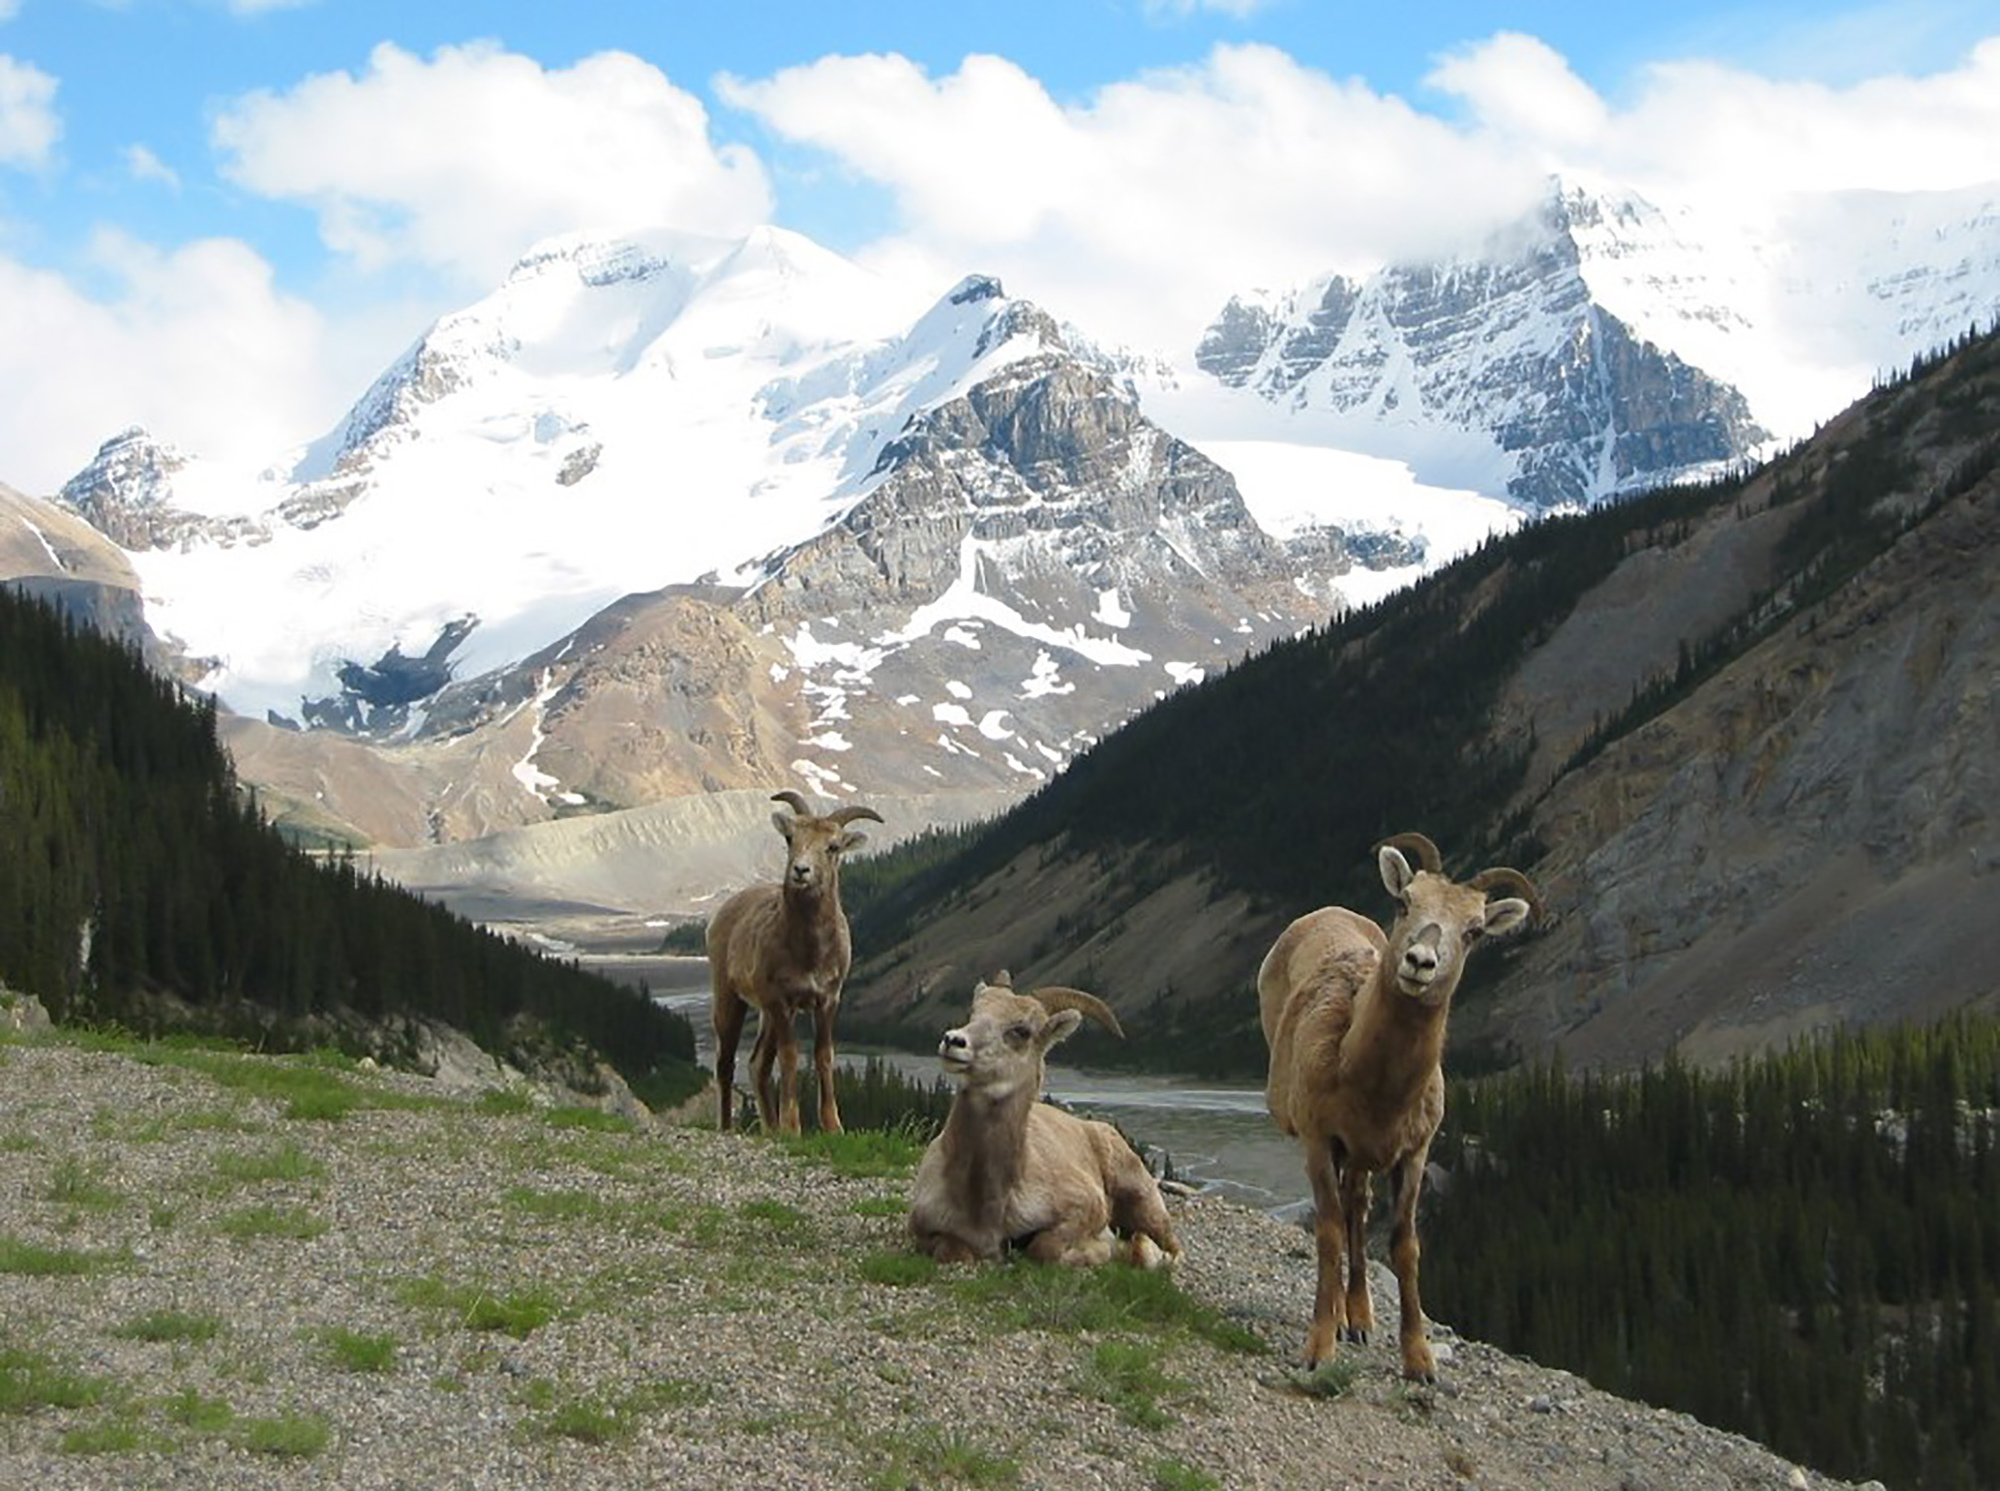 3 wild mountain goats on the side of a mountain in Jasper National Park.